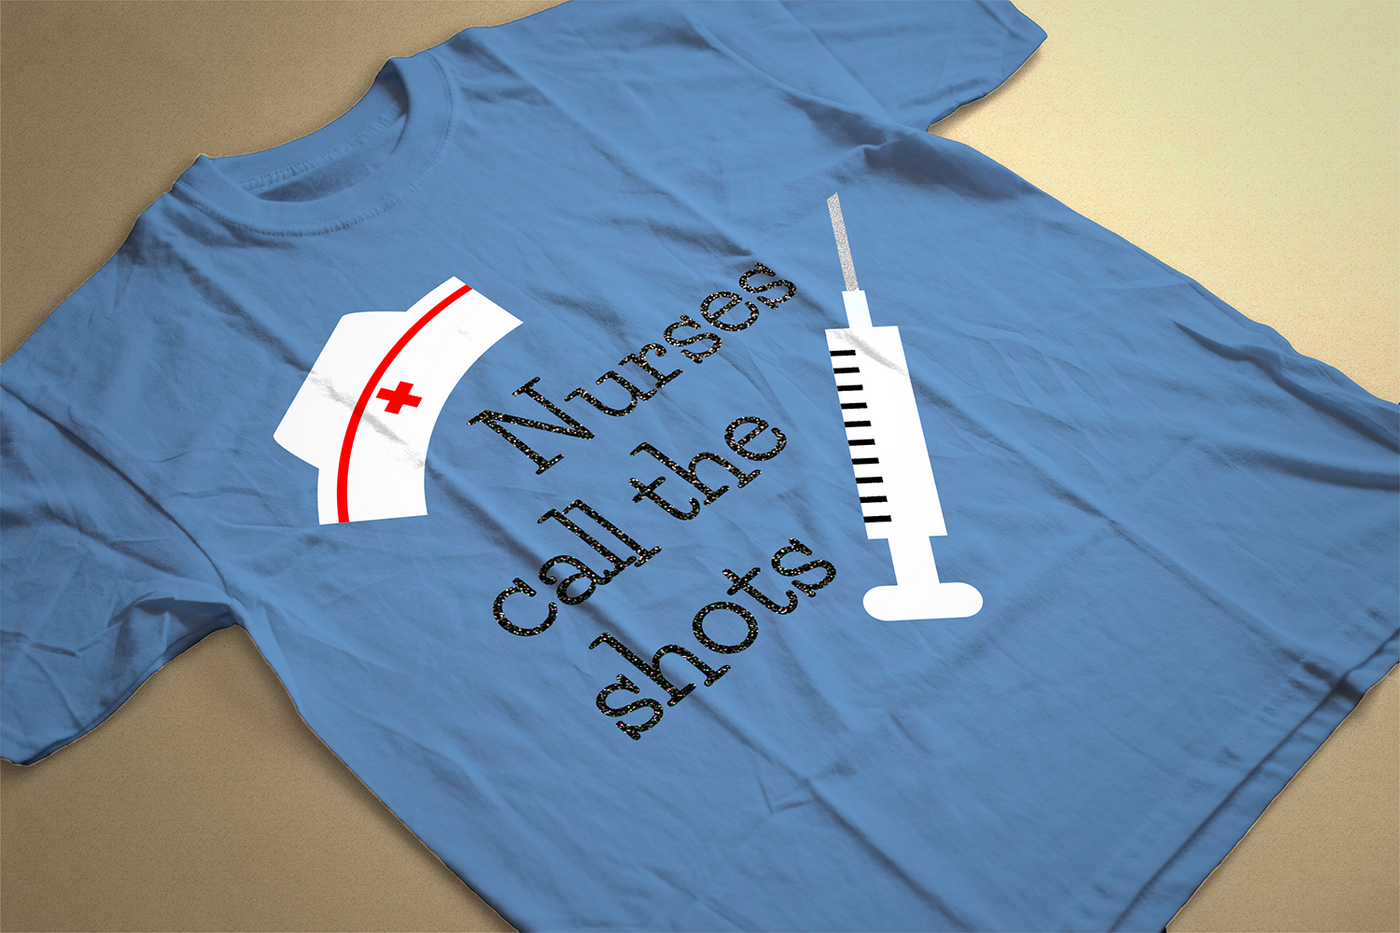 Nurse hat and syringe design with the words "Nurses call the shots"